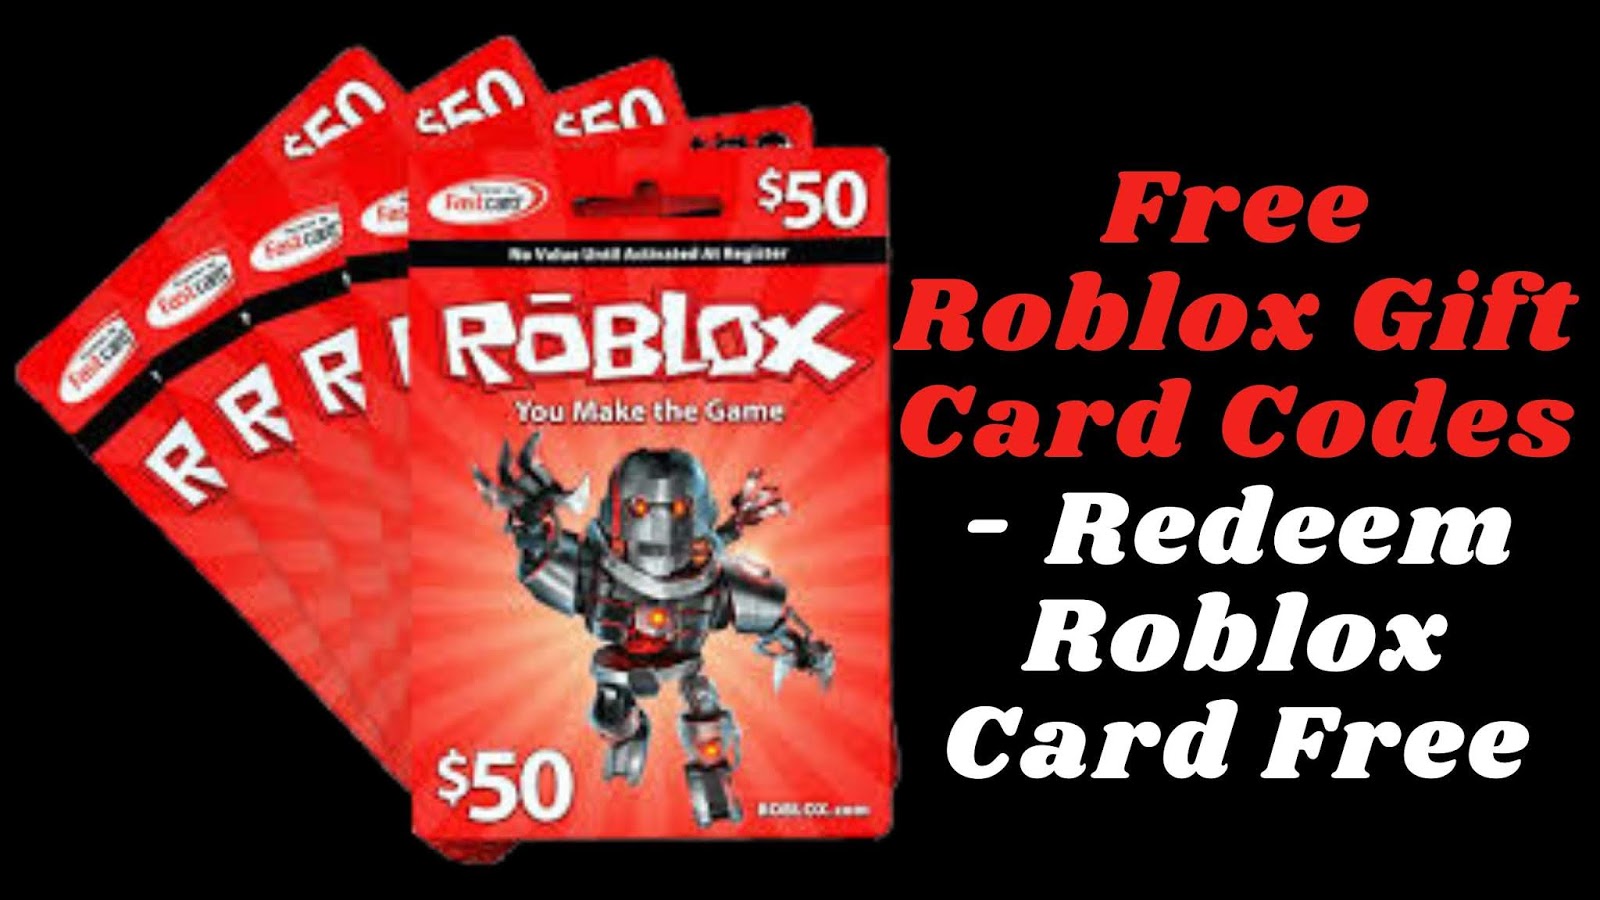 Free Gift Cards Free Roblox Gift Card Codes Redeem Roblox Card Free - roblox robux redeem roblox card